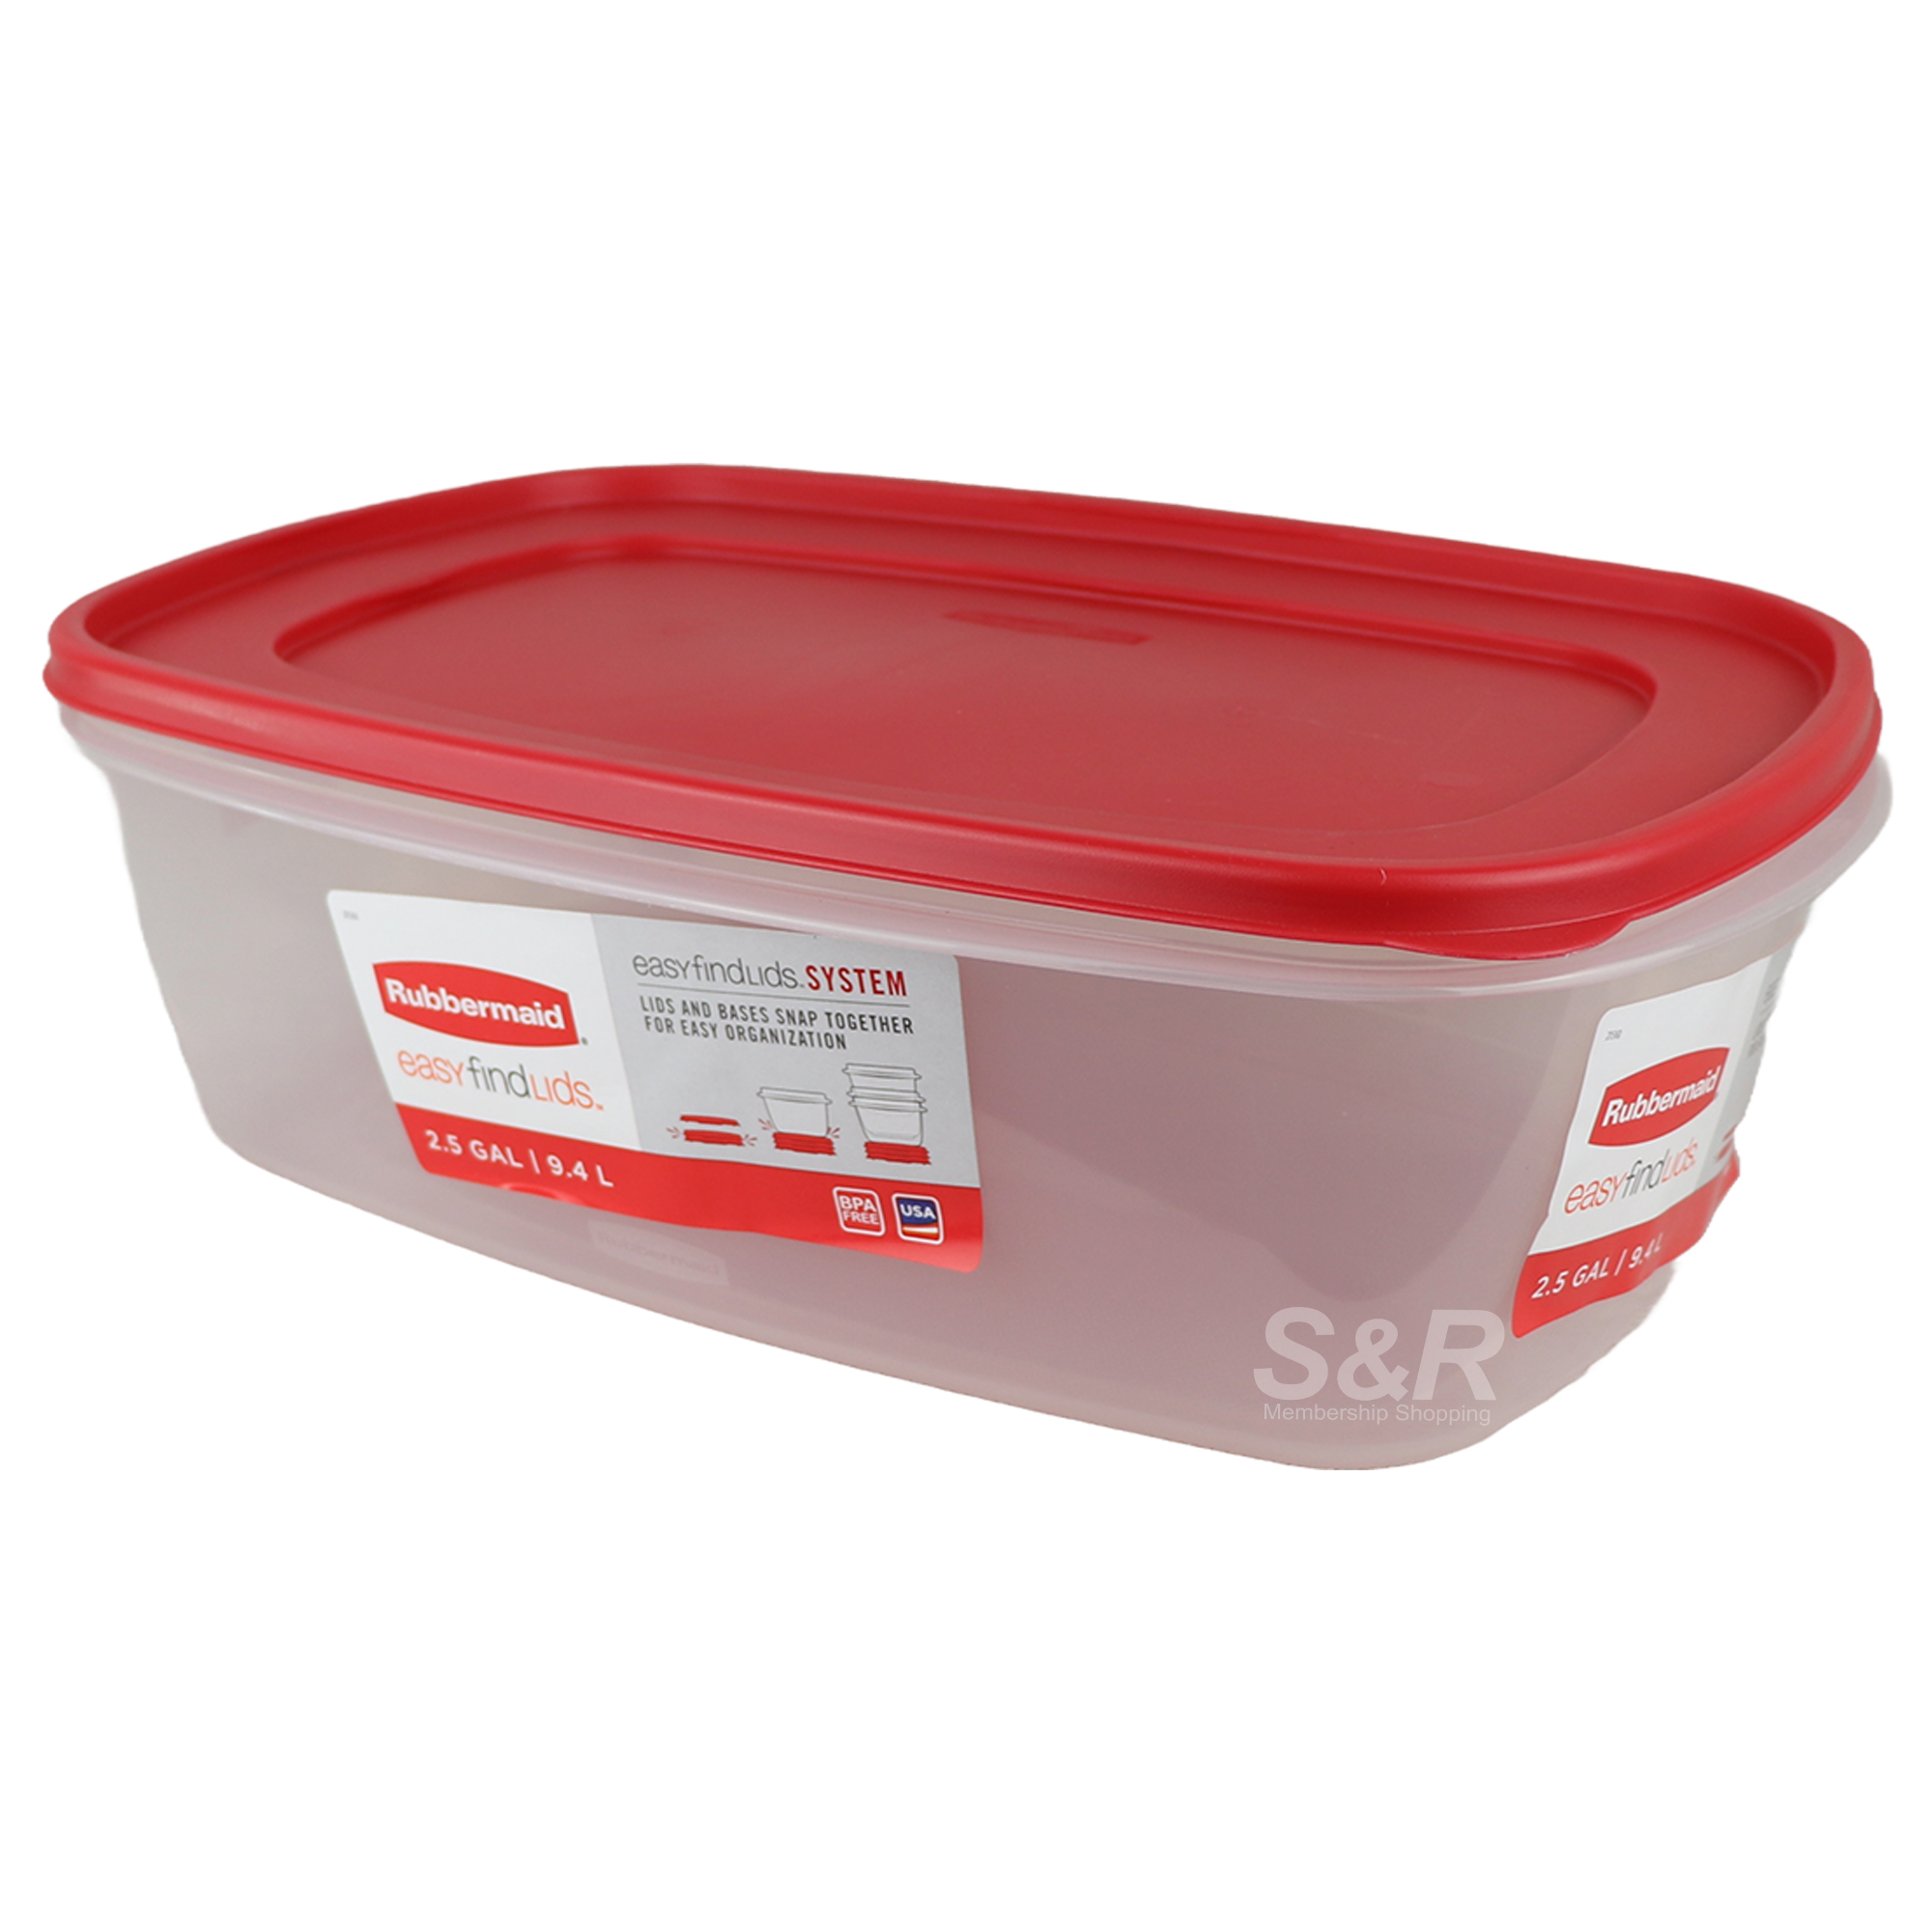 Rubbermaid Easy Find Lids System Rectangle Container 9.4L